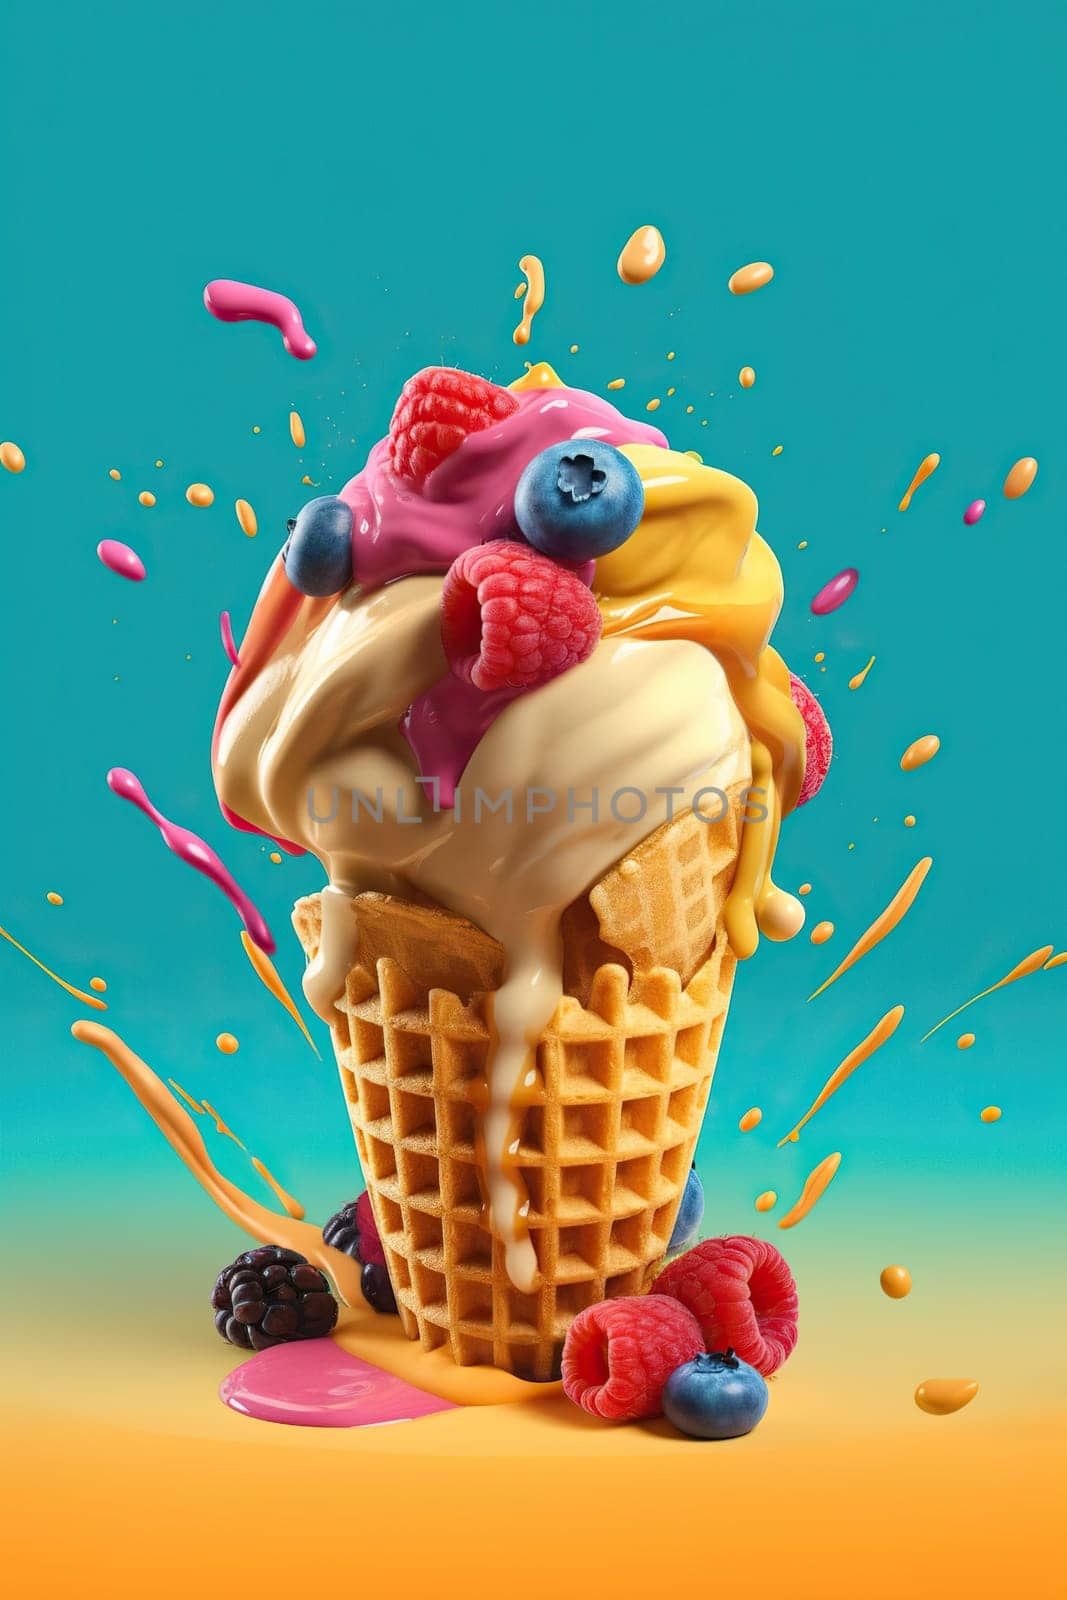 Illustration Delicious Colorful Sweet Ice Cream In Waffle Cups by tan4ikk1